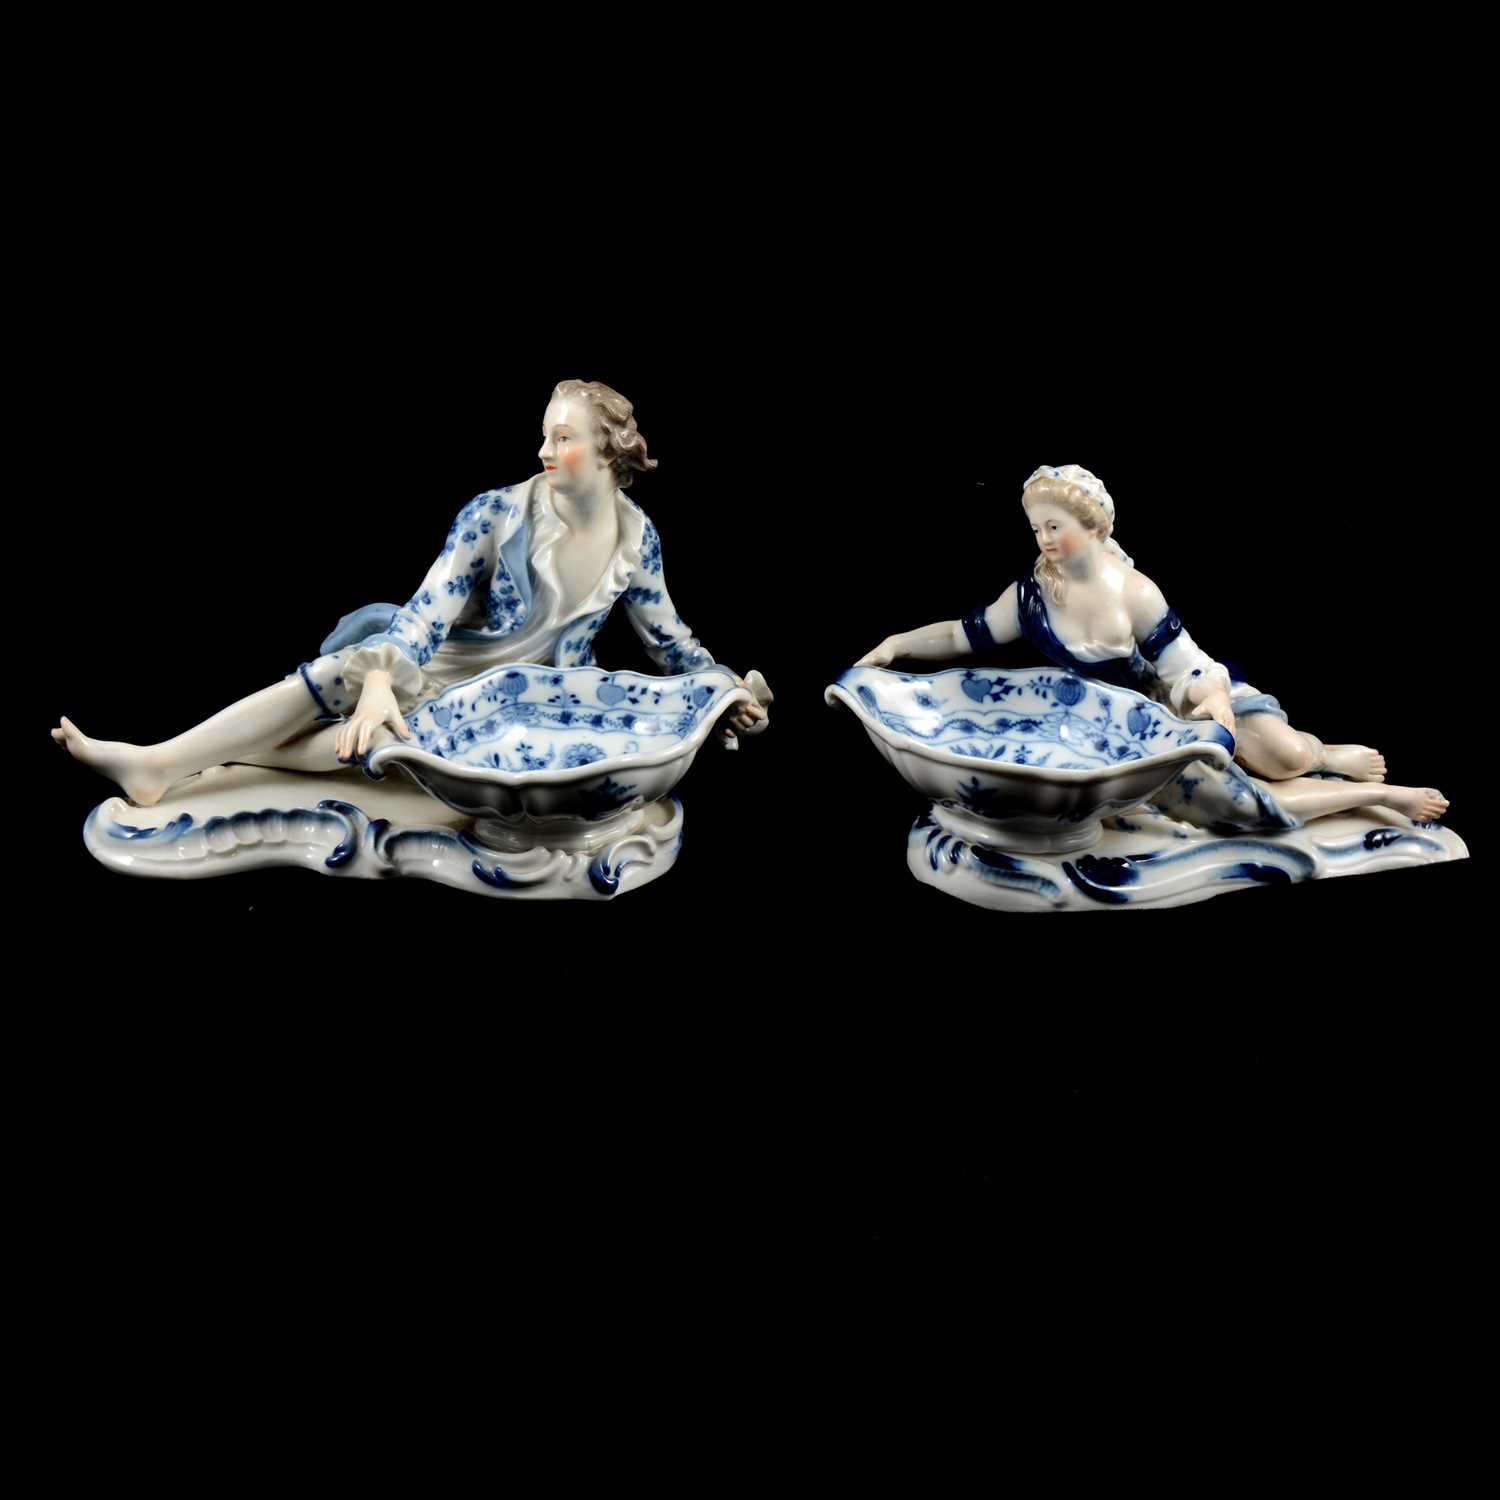 Near pair of Meissen porcelain figural table salts, late 19th / early 20th century